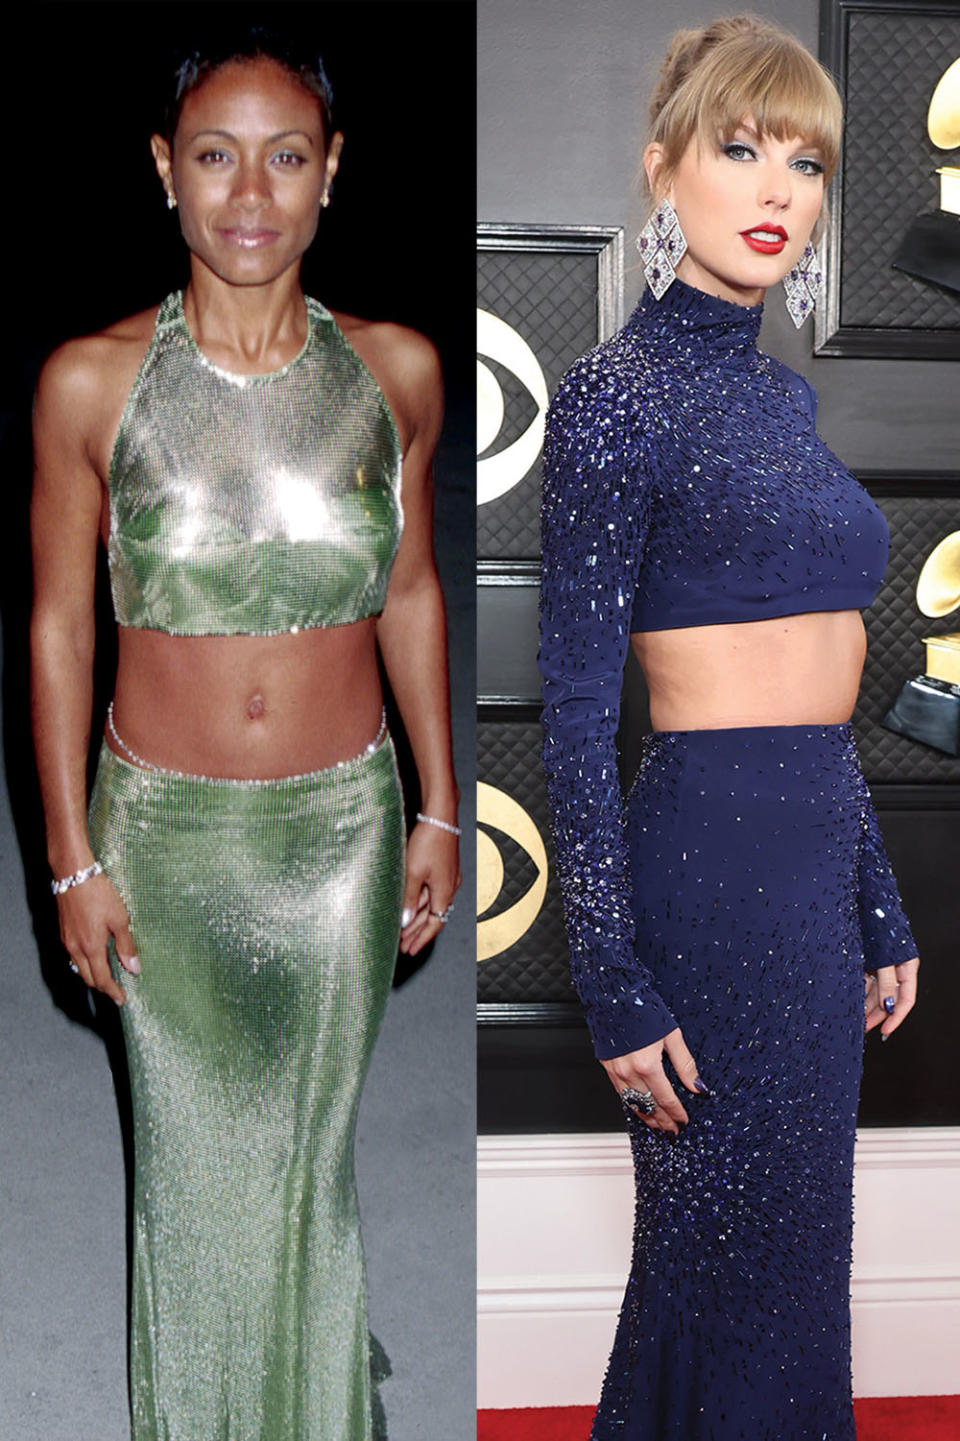 Jade Pinkett Smith in Versace at the Oscars. Right: Taylor Swift in Roberto Cavalli at the 2023 Grammys.